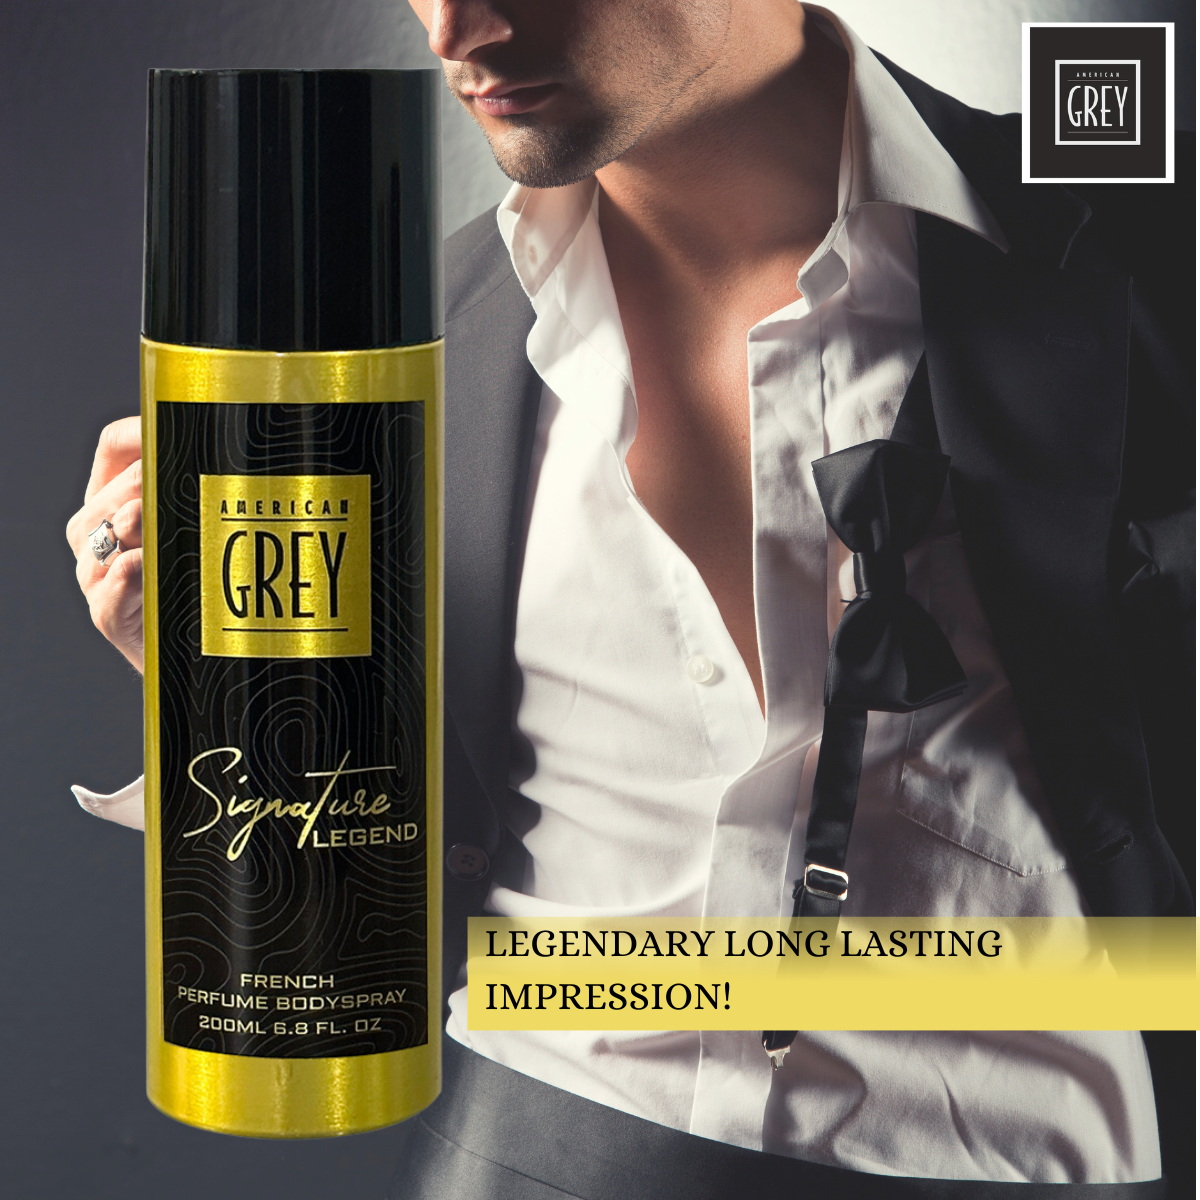 seductive fragrance for men, seductive and captivating fragrance for men, signature legend, men deodorant, deodorant for men at best price in india, seductive fragrance for men, signature legend deo for men, signature legend men deodorant, buy men deodorant online, best long lasting deo for men in india, best long lasting deo for men, best long lasting deodorant in india for male 2023, best deo spray in India, best deo for men, best men deo brand in India, best tonka and amber smelling deo for men,  top rated men deo, men grooming essential, men fragrance for winter season, best deo for cold weather, popular winter deodorant for men, best smelling deo for day wear